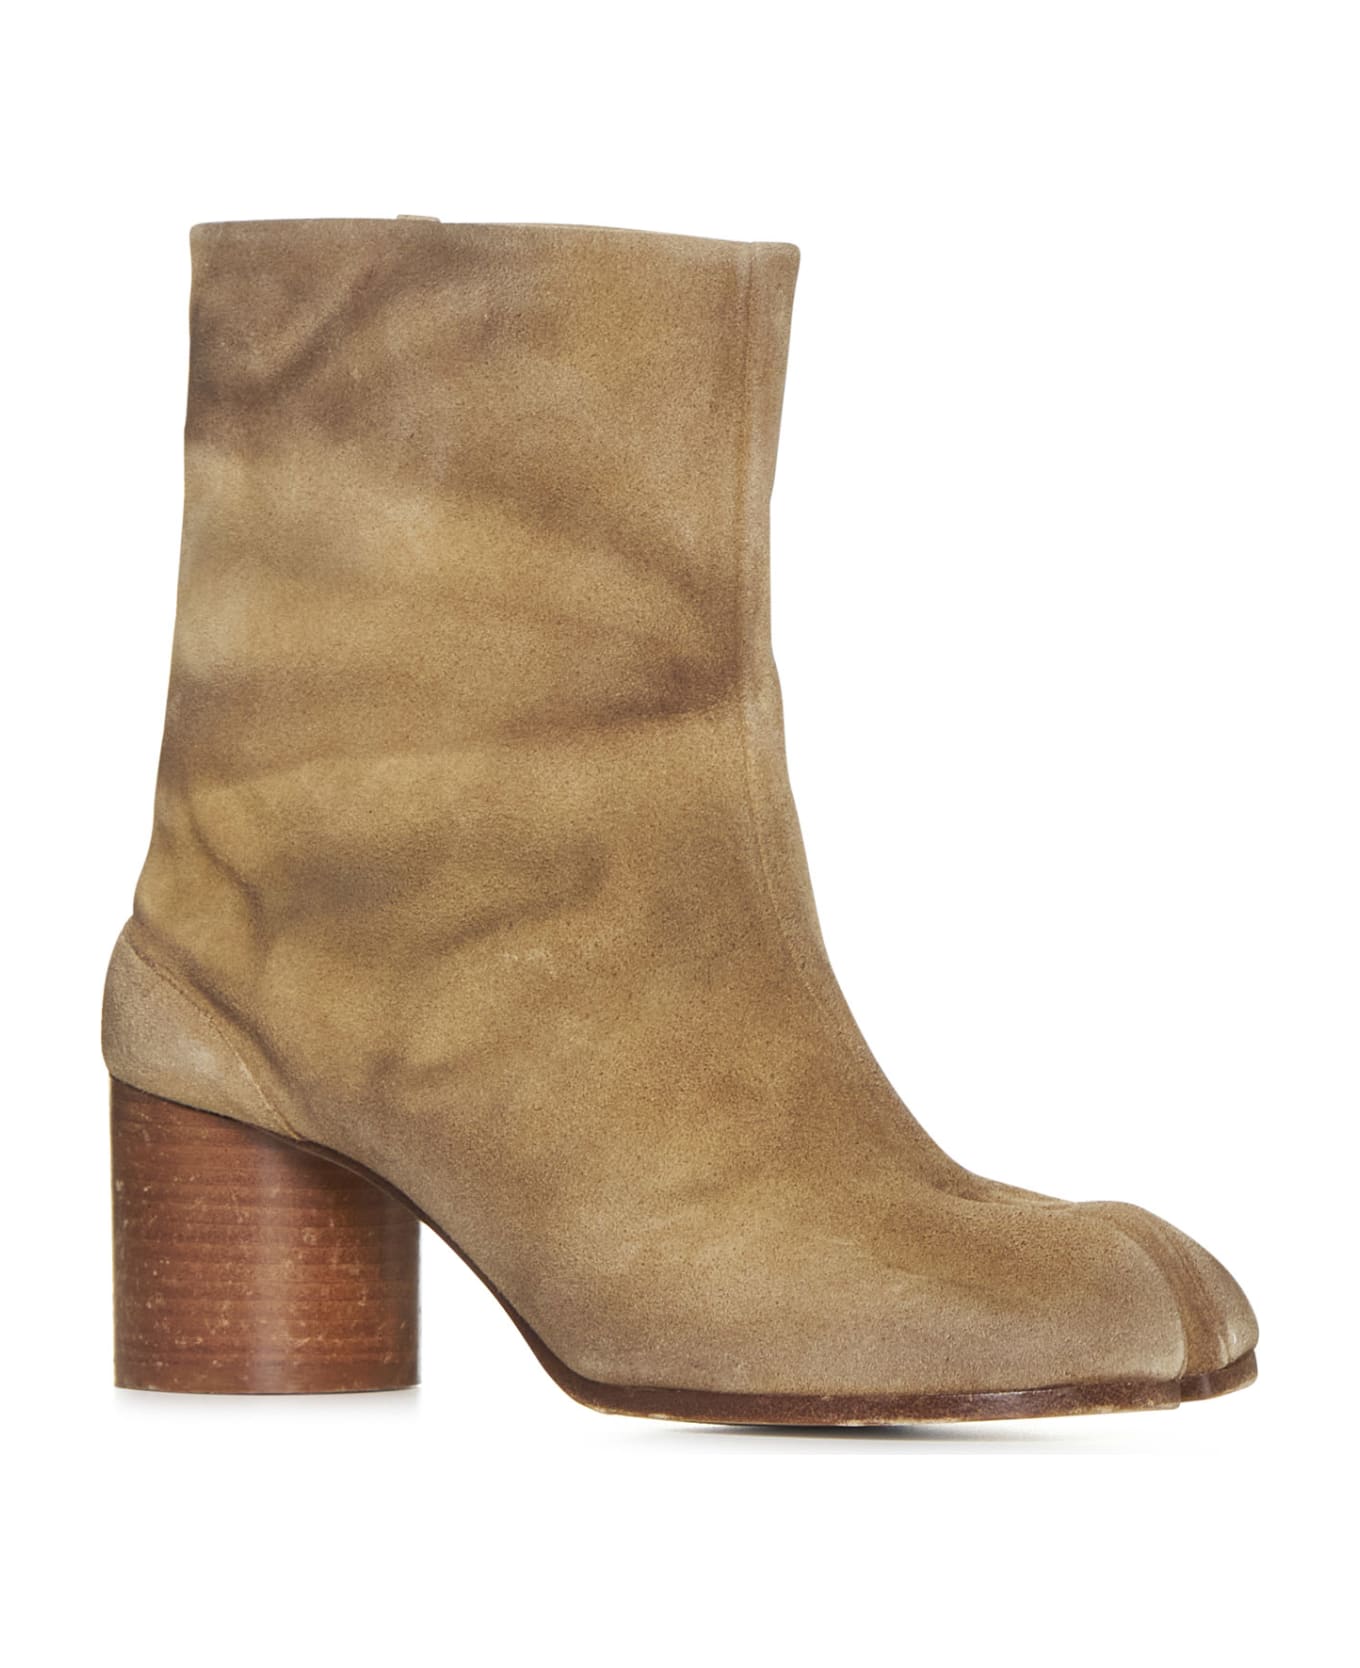 Maison Margiela Tabi Ankle Boots In Camel Suede - Beige ブーツ